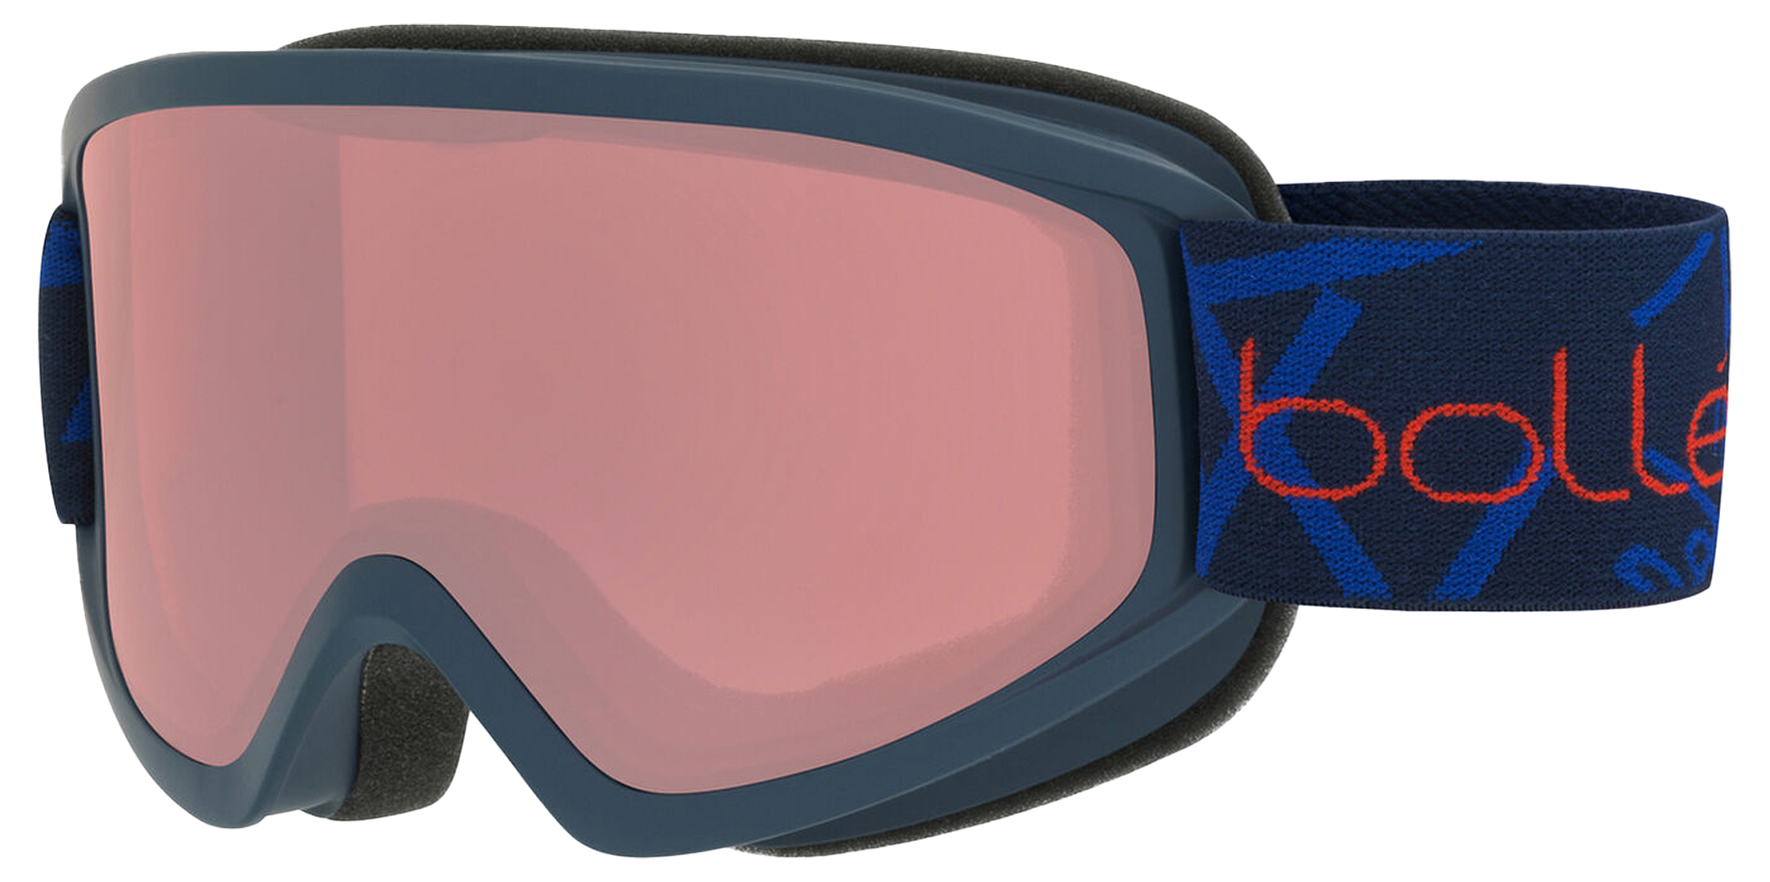 Bolle Snow/Ski Goggles (Various Styles) from $17 + Free Shipping